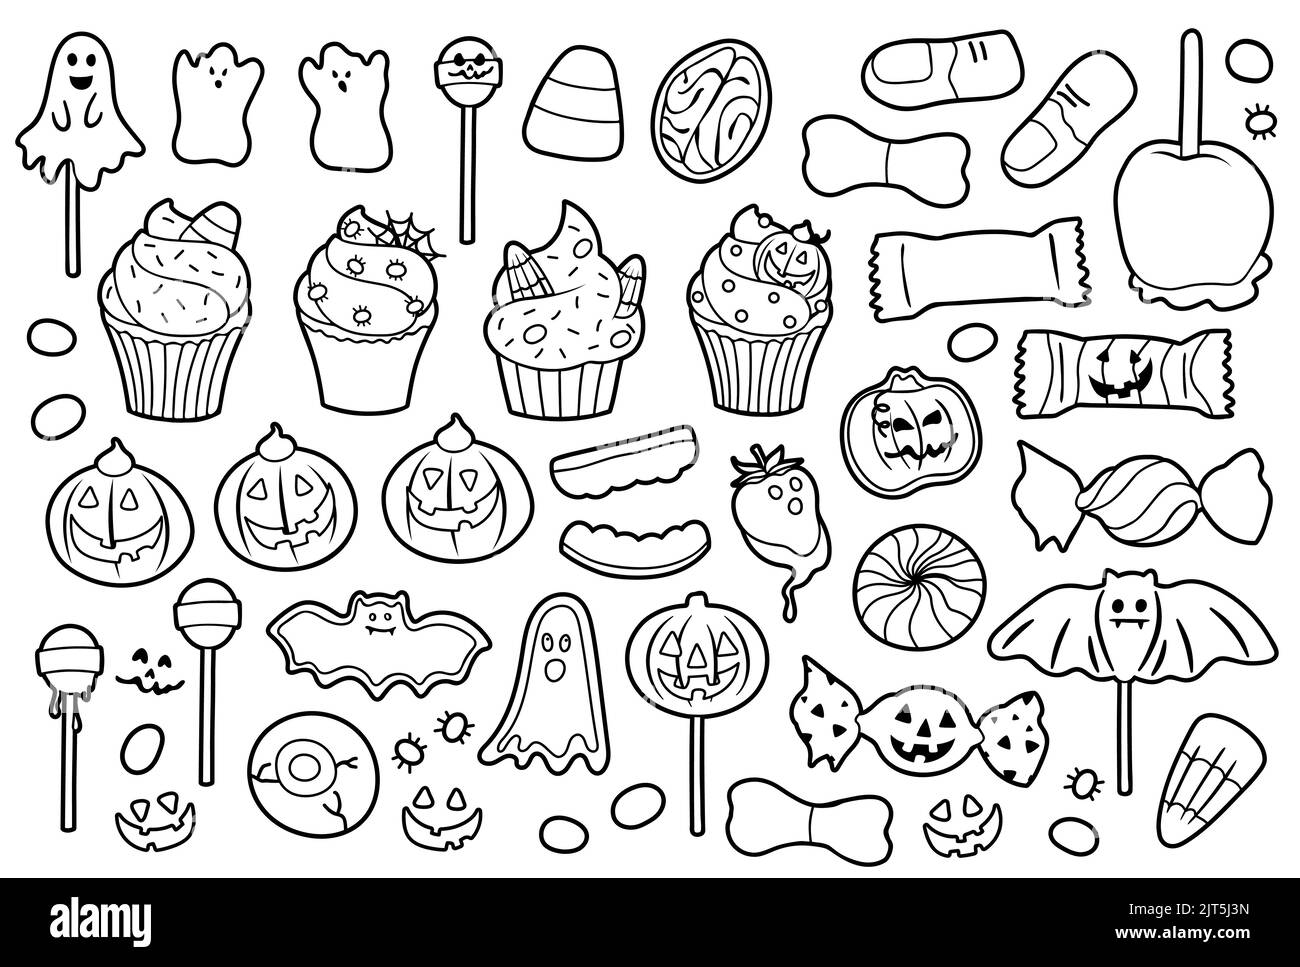 Halloween celebration related candies, desserts and sweets. Collection of hand drawn, vector cartoon illustrations. Stock Vector